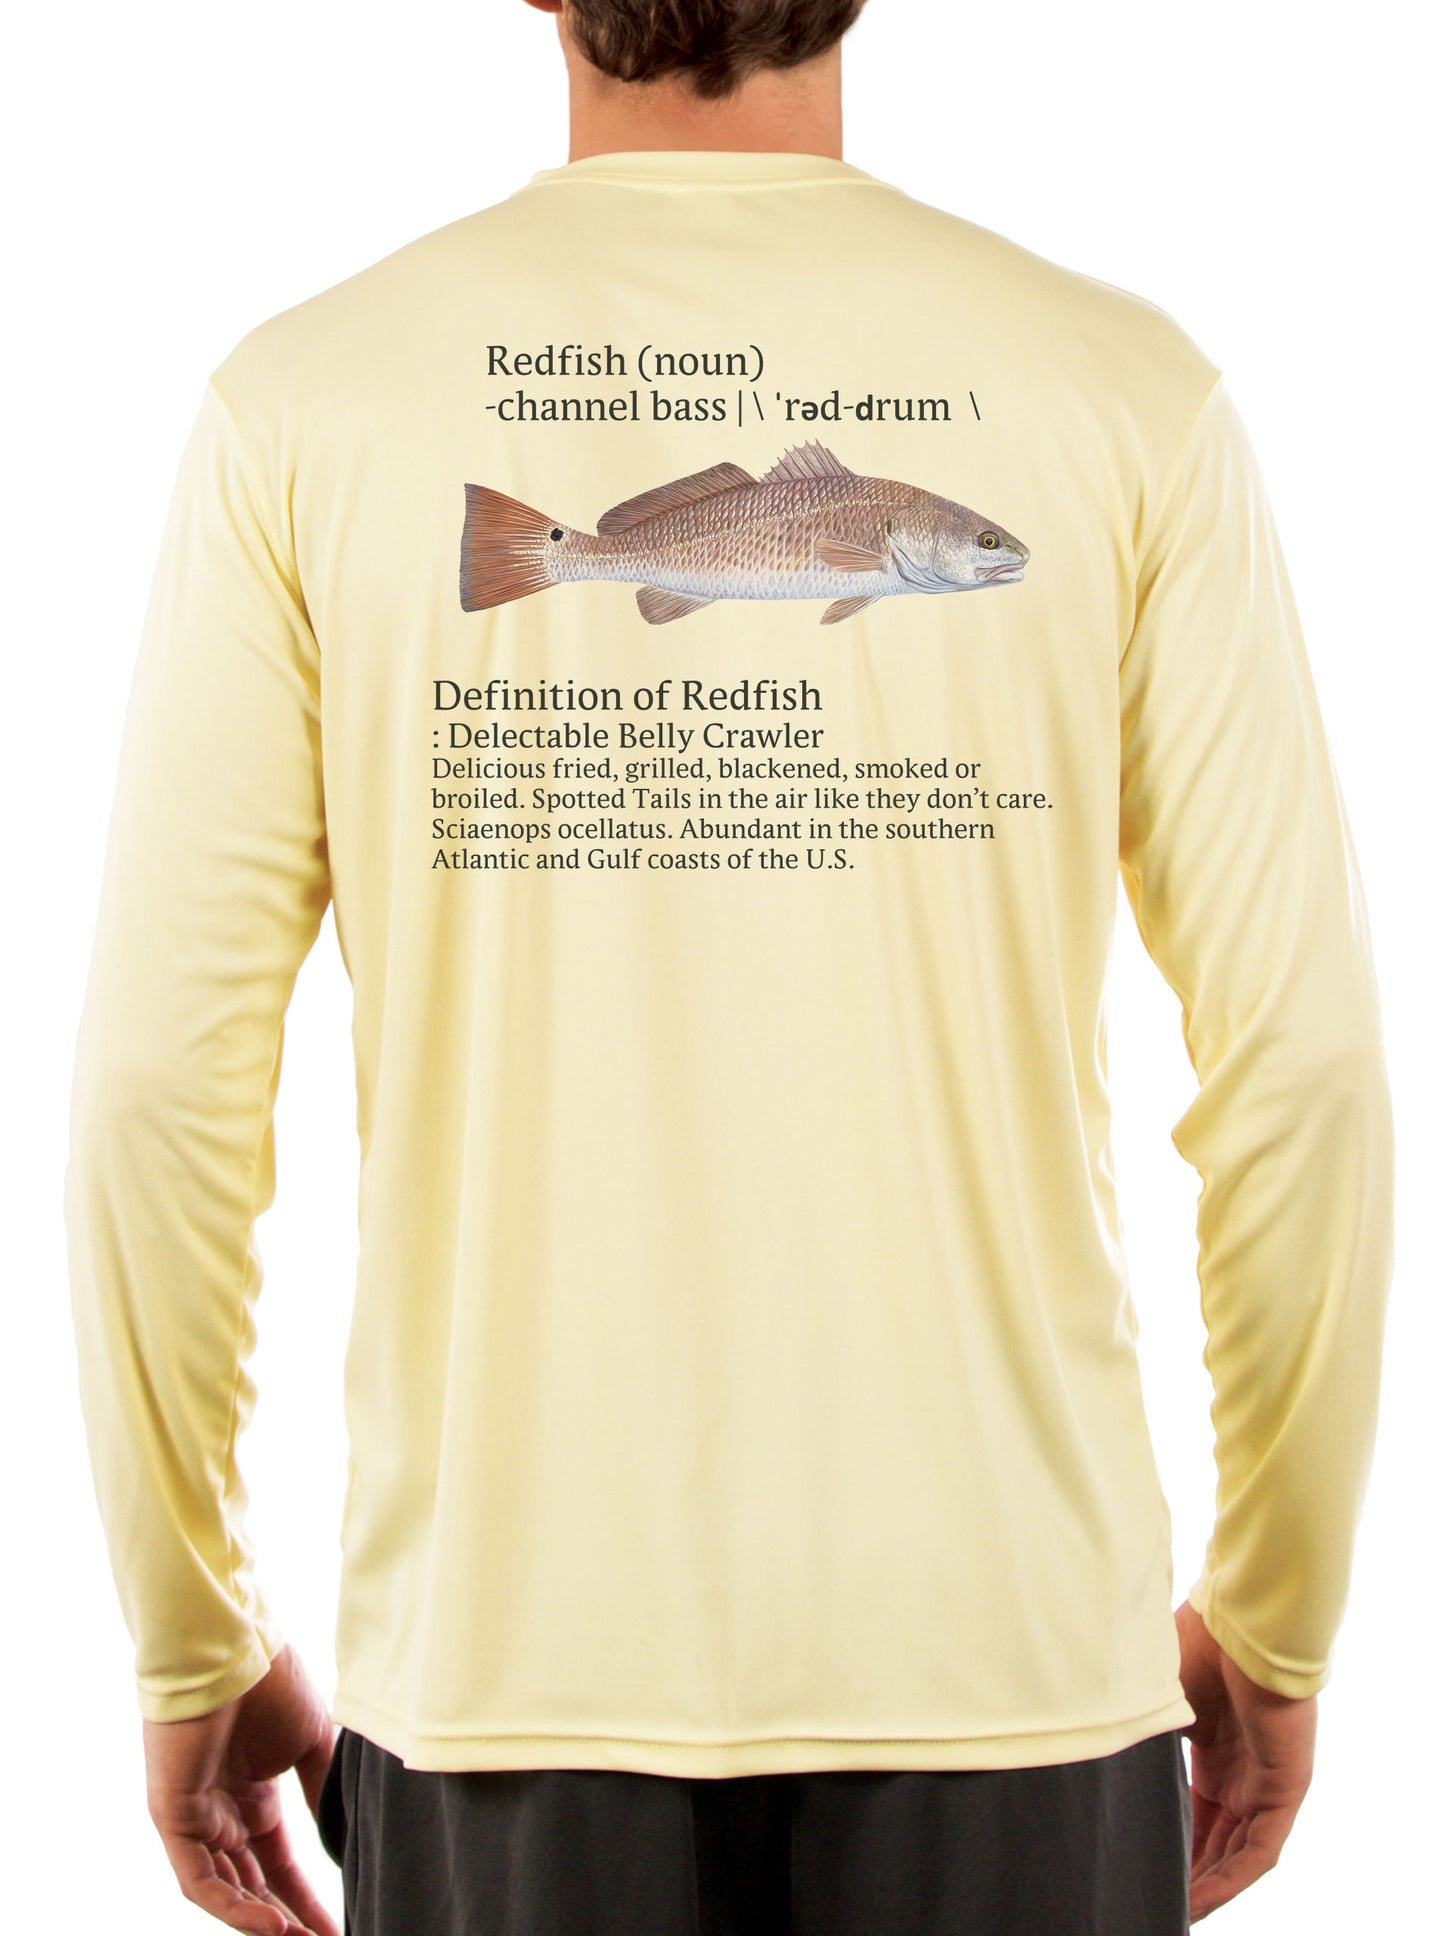 Redfish Fishing Shirts for Men Red Drum Channel Bass - UV Protected +50 Sun Protection with Moisture Wicking Technology X-Large / Yellow